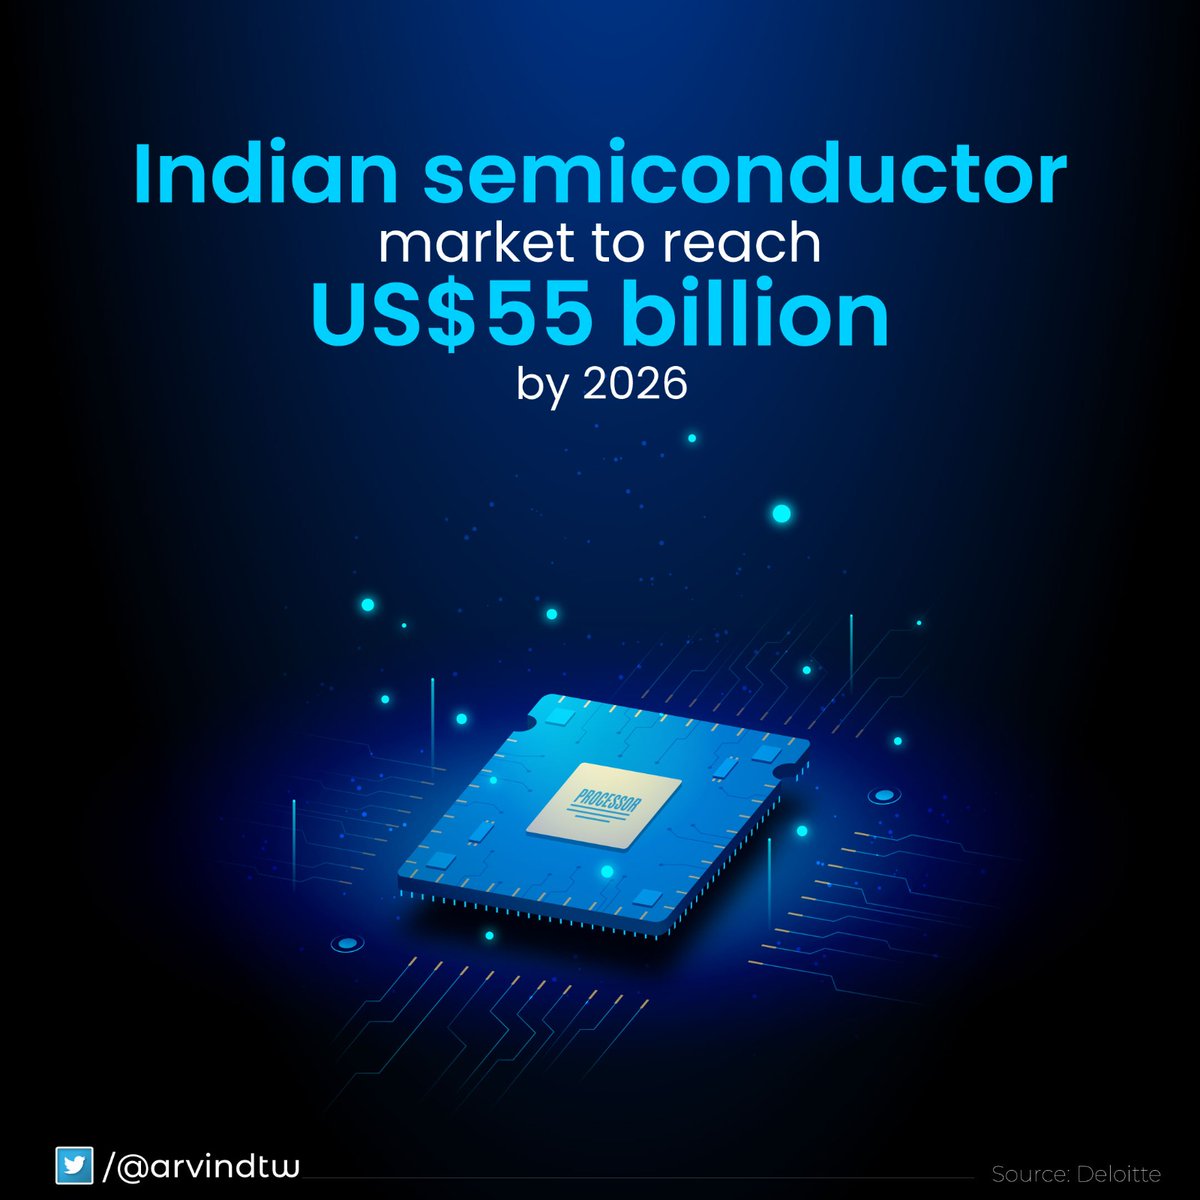 Indian #semiconductor market is driven by 3 industries -- smartphones & wearables, automotive components, computing & data storage. Government schemes like PLI & DLI will establish #India as a hub for semiconductor manufacturing in the next three years. @Rajeev_GoI @GoI_MeitY